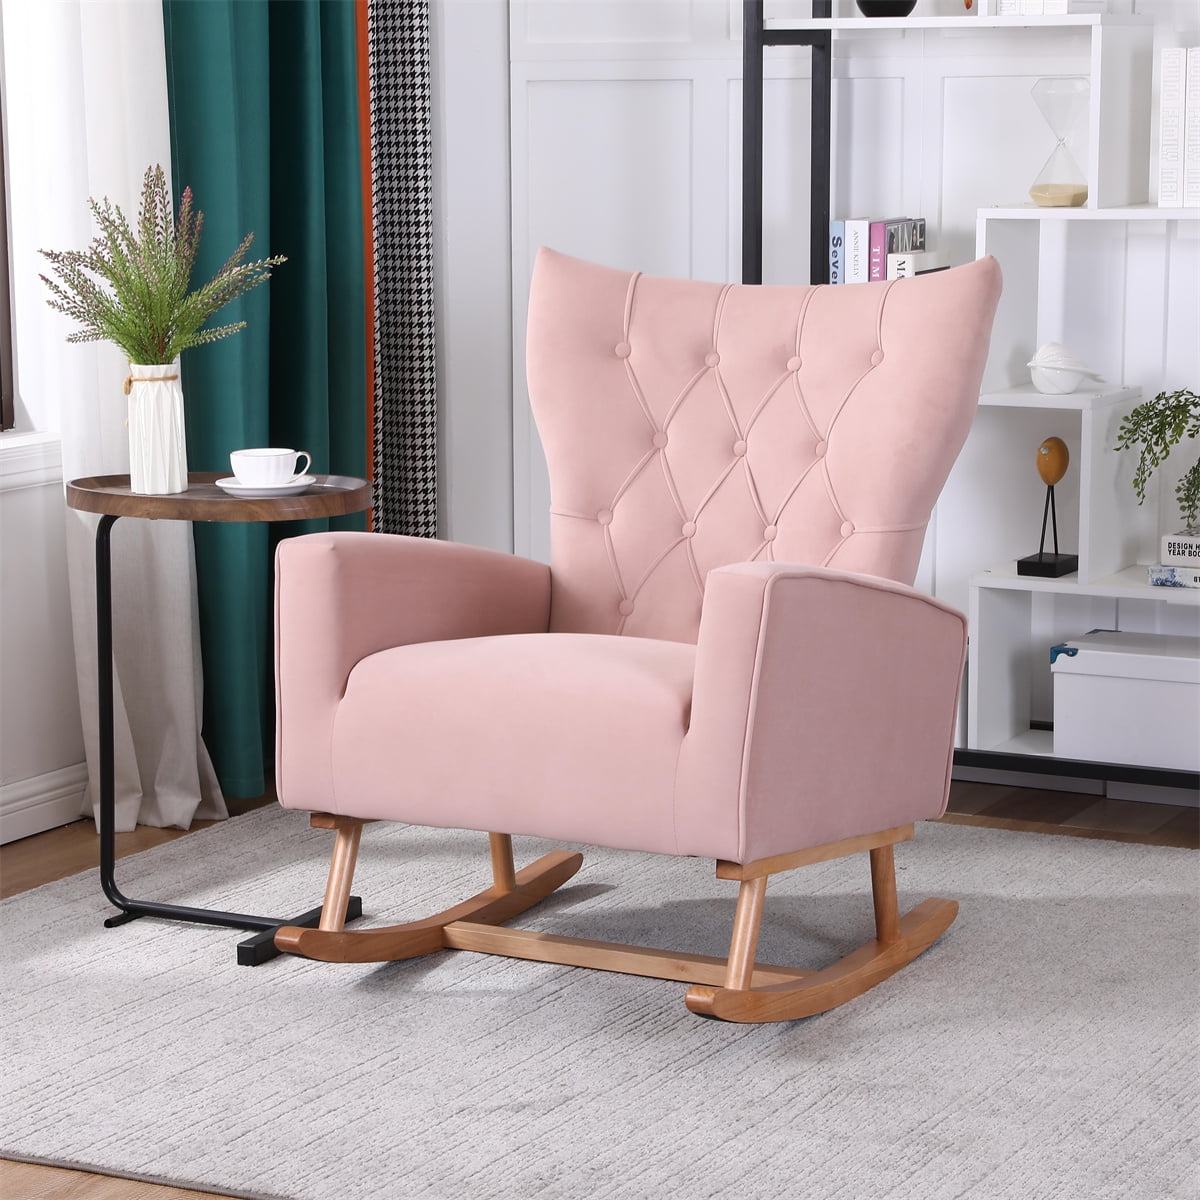 Rocking Chair Nursery,Solid Wood Legs with Teddy Fabric Upholstered,Nap Armchair for Living Rooms,Bedrooms,Best Gift - Pink